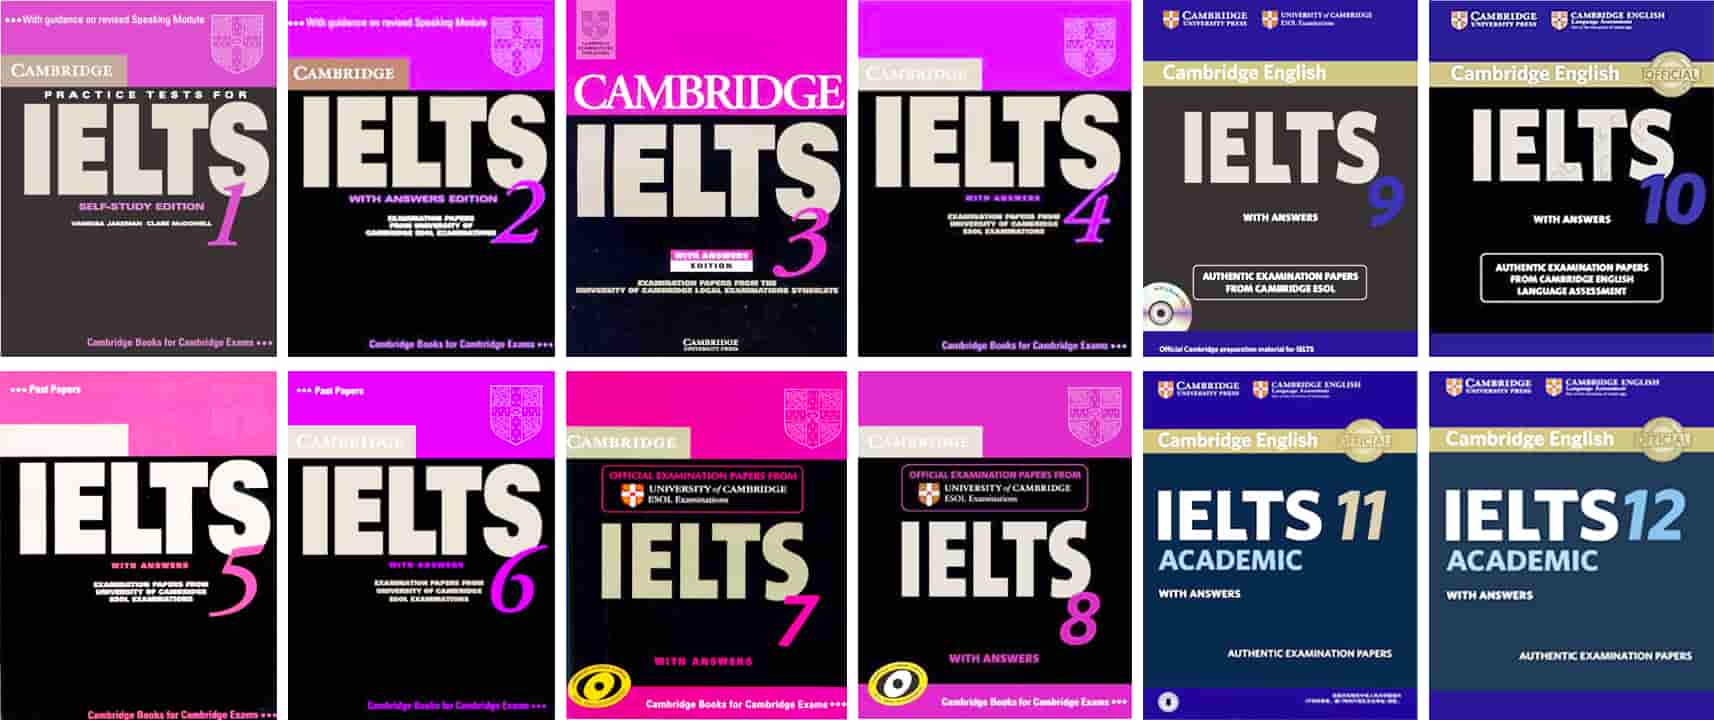 Cambridge IELTS Book (Numbers 10 to 15)